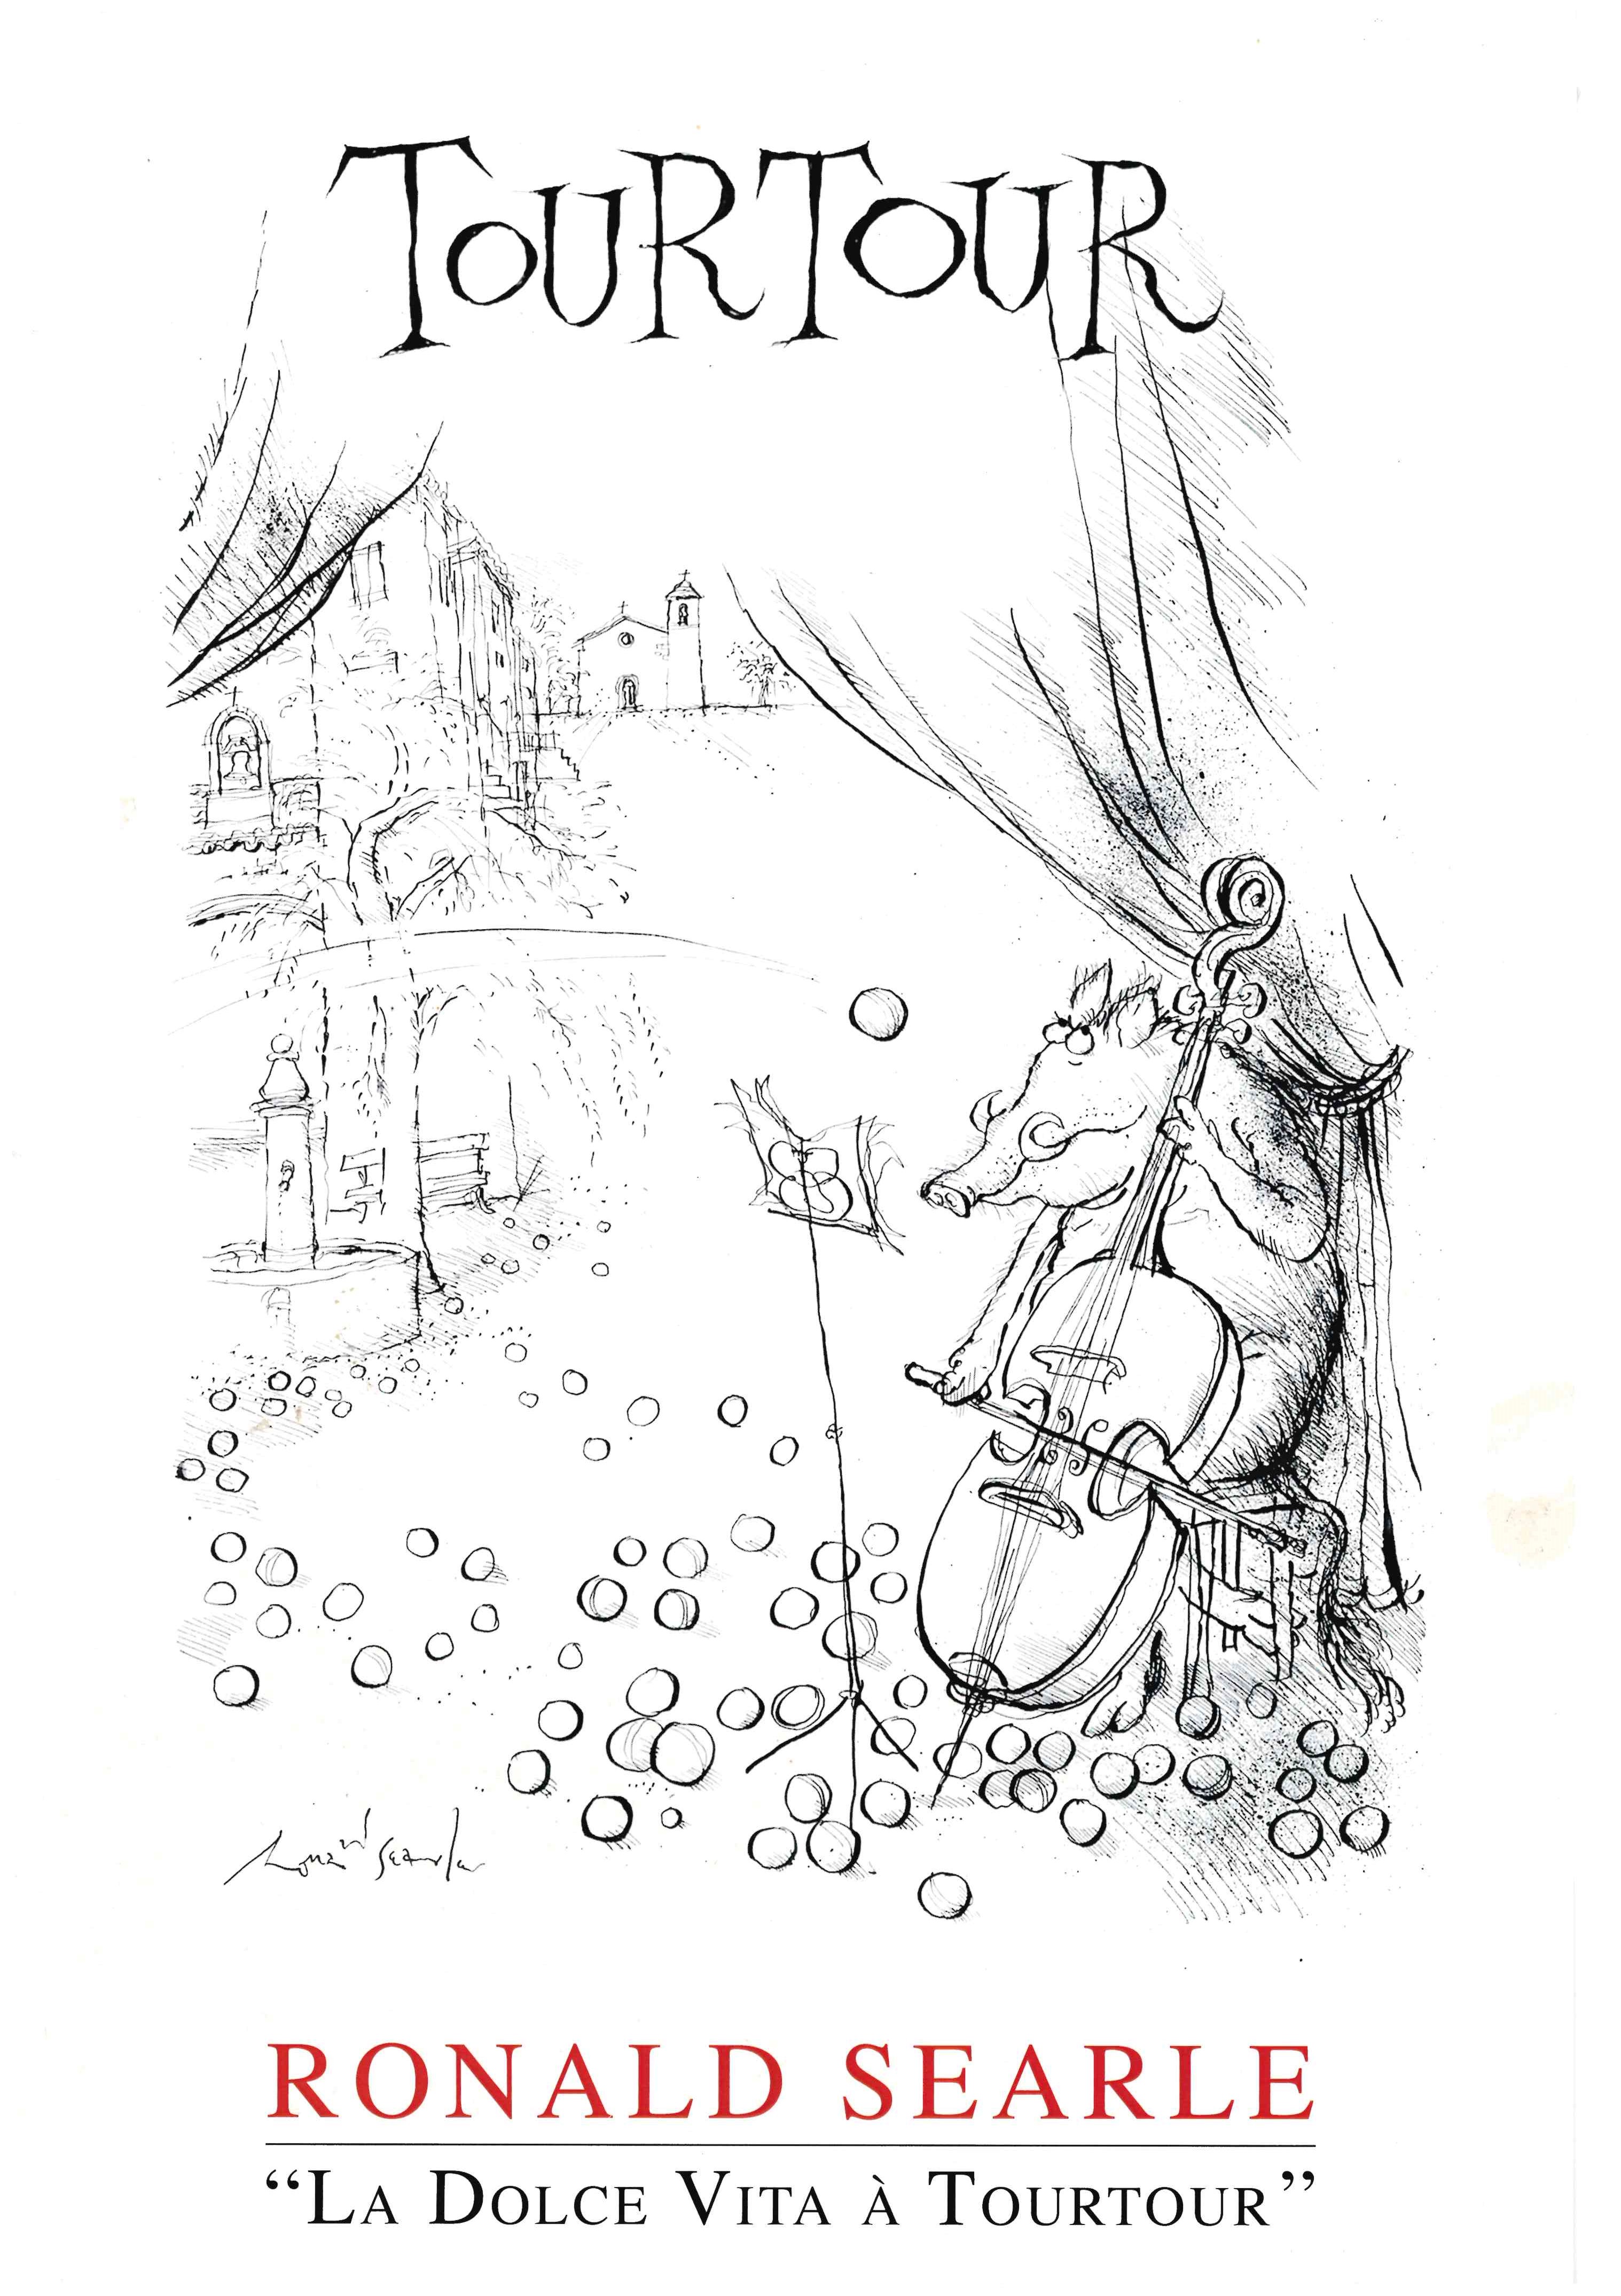 Photo Exposition : Ronald Searle